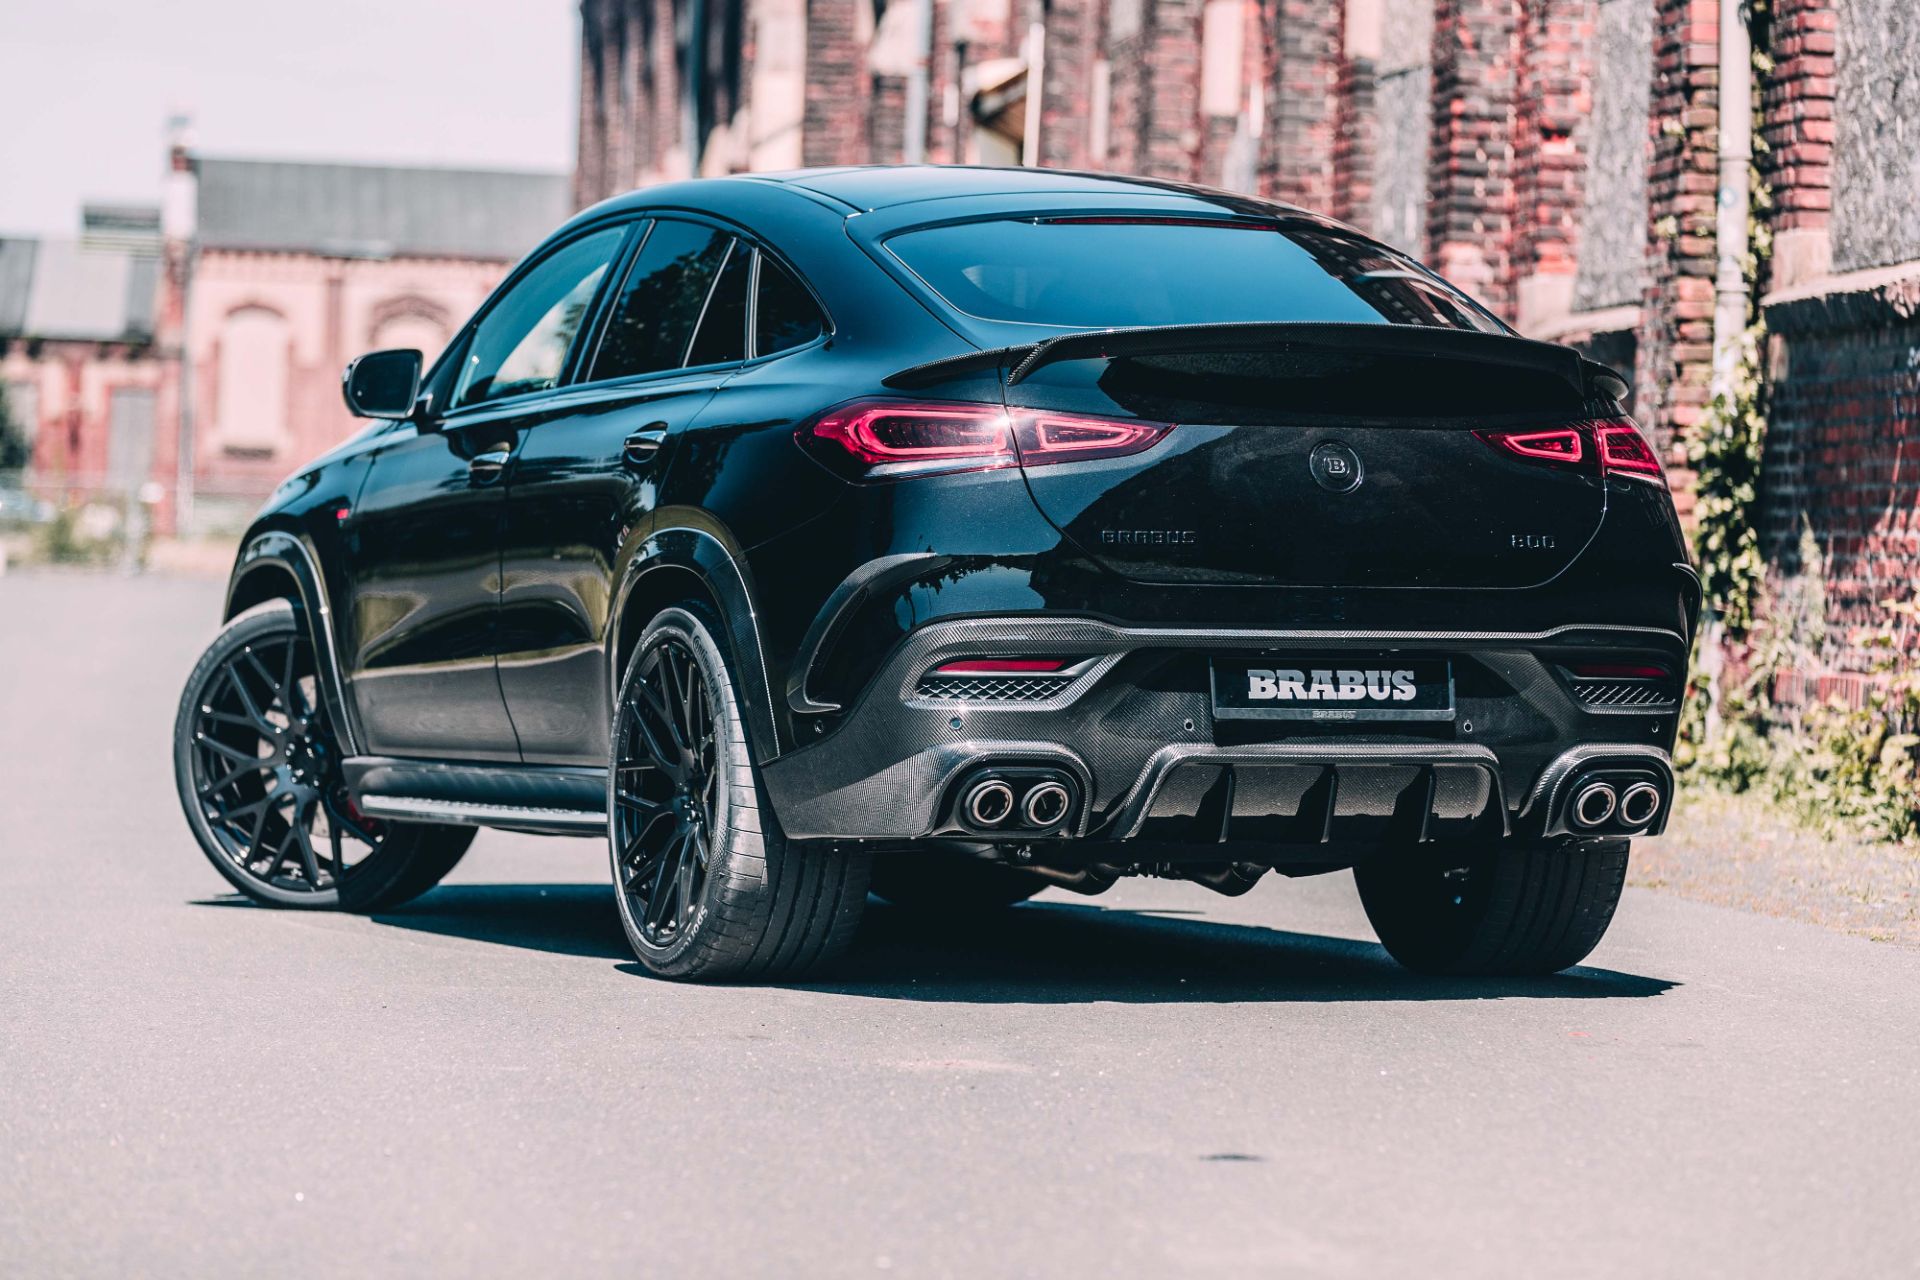 Brabus Gives The MercedesAMG GLE 63 S Coupe The 789 HP Treatment